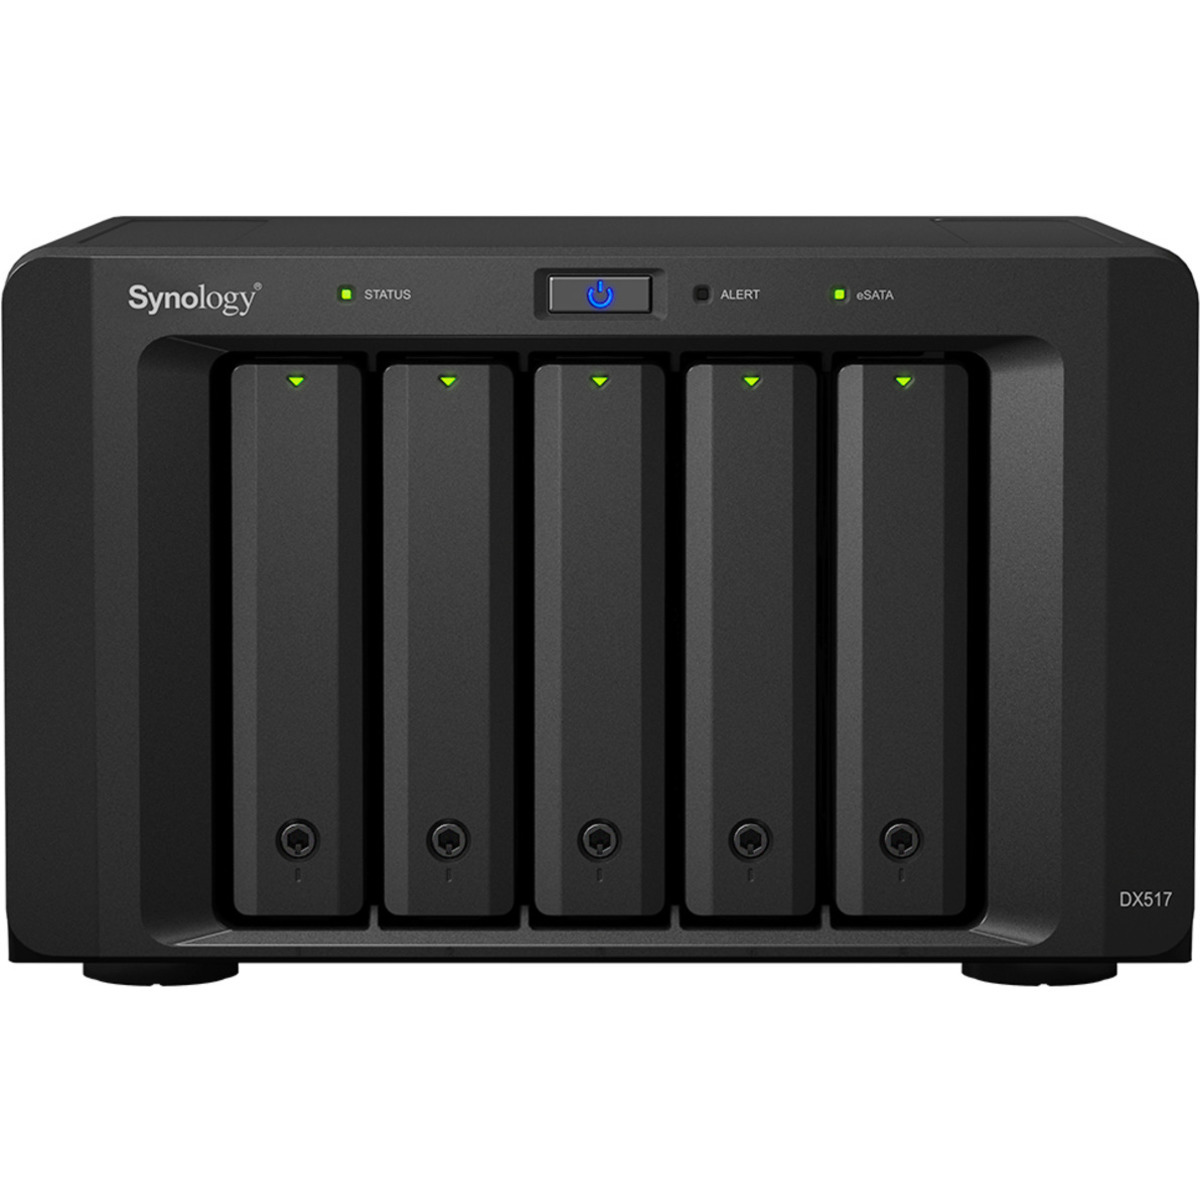 buy $937 Synology DX517 10tb Desktop Expansion Enclosure 5x2000gb Seagate BarraCuda ST2000DM008 3.5 7200rpm SATA 6Gb/s HDD CONSUMER Class Drives Installed - Burn-In Tested - ON SALE - nas headquarters buy network attached storage server device das new raid-5 free shipping usa christmas new year holiday sale DX517